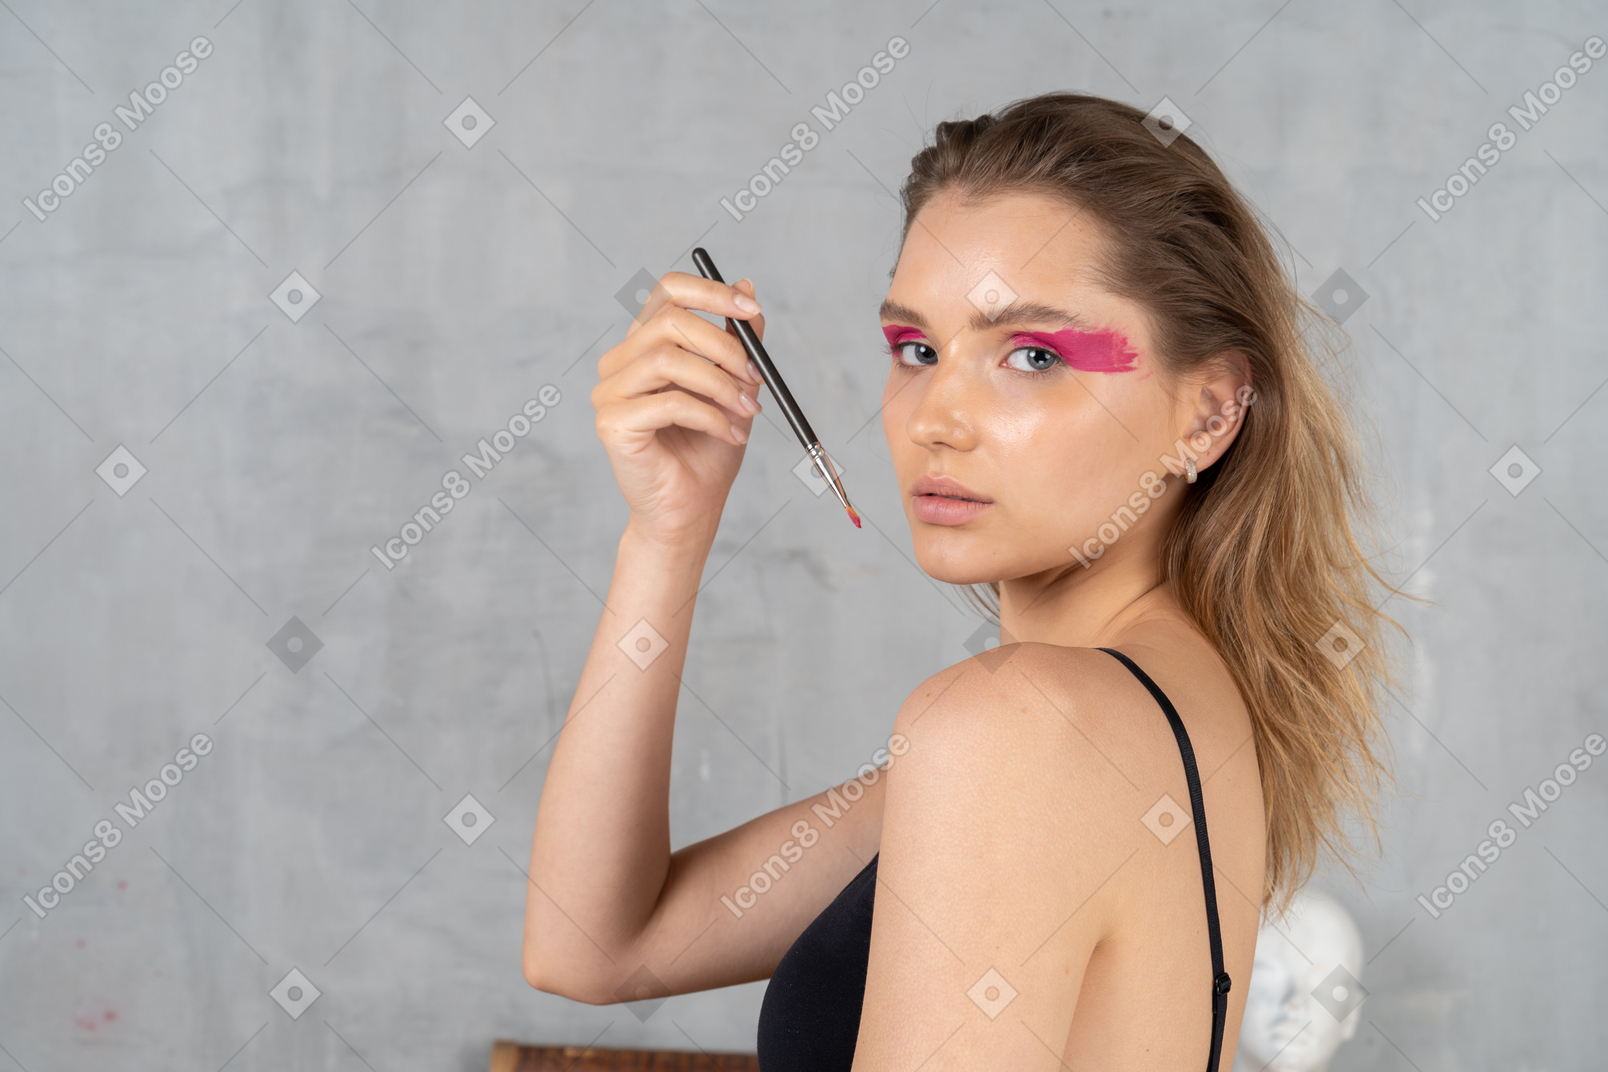 Attractive young woman with bright pink eye make-up holding a brush